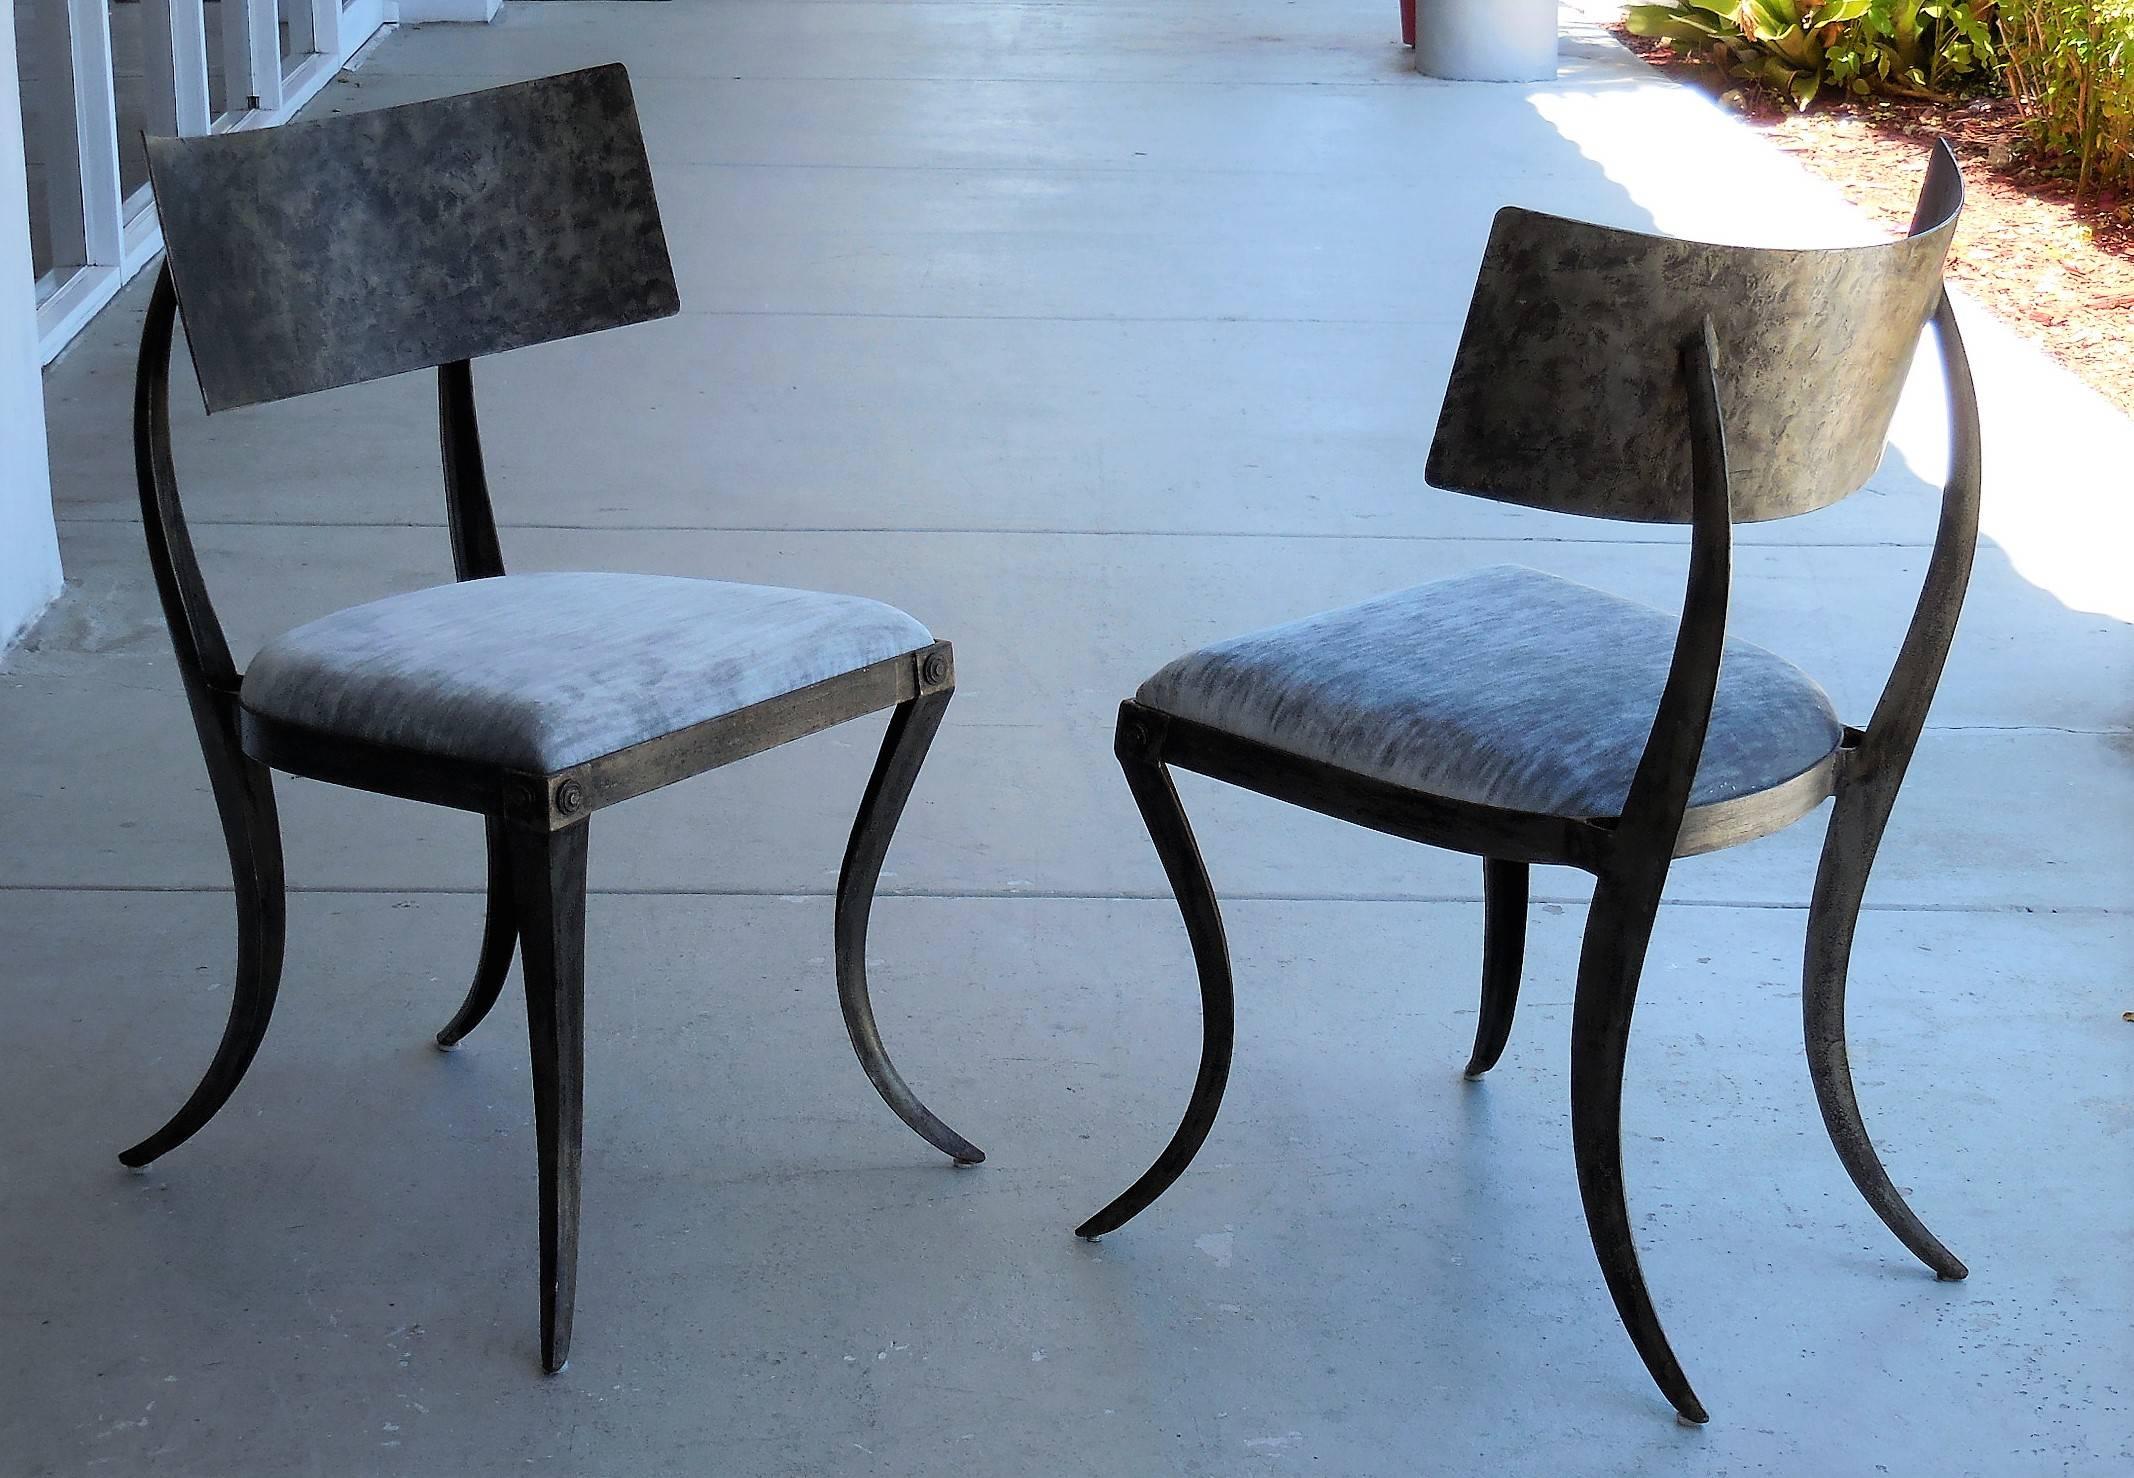 Philippine Pair of Metal Klismos Chairs by Ched Bergeron